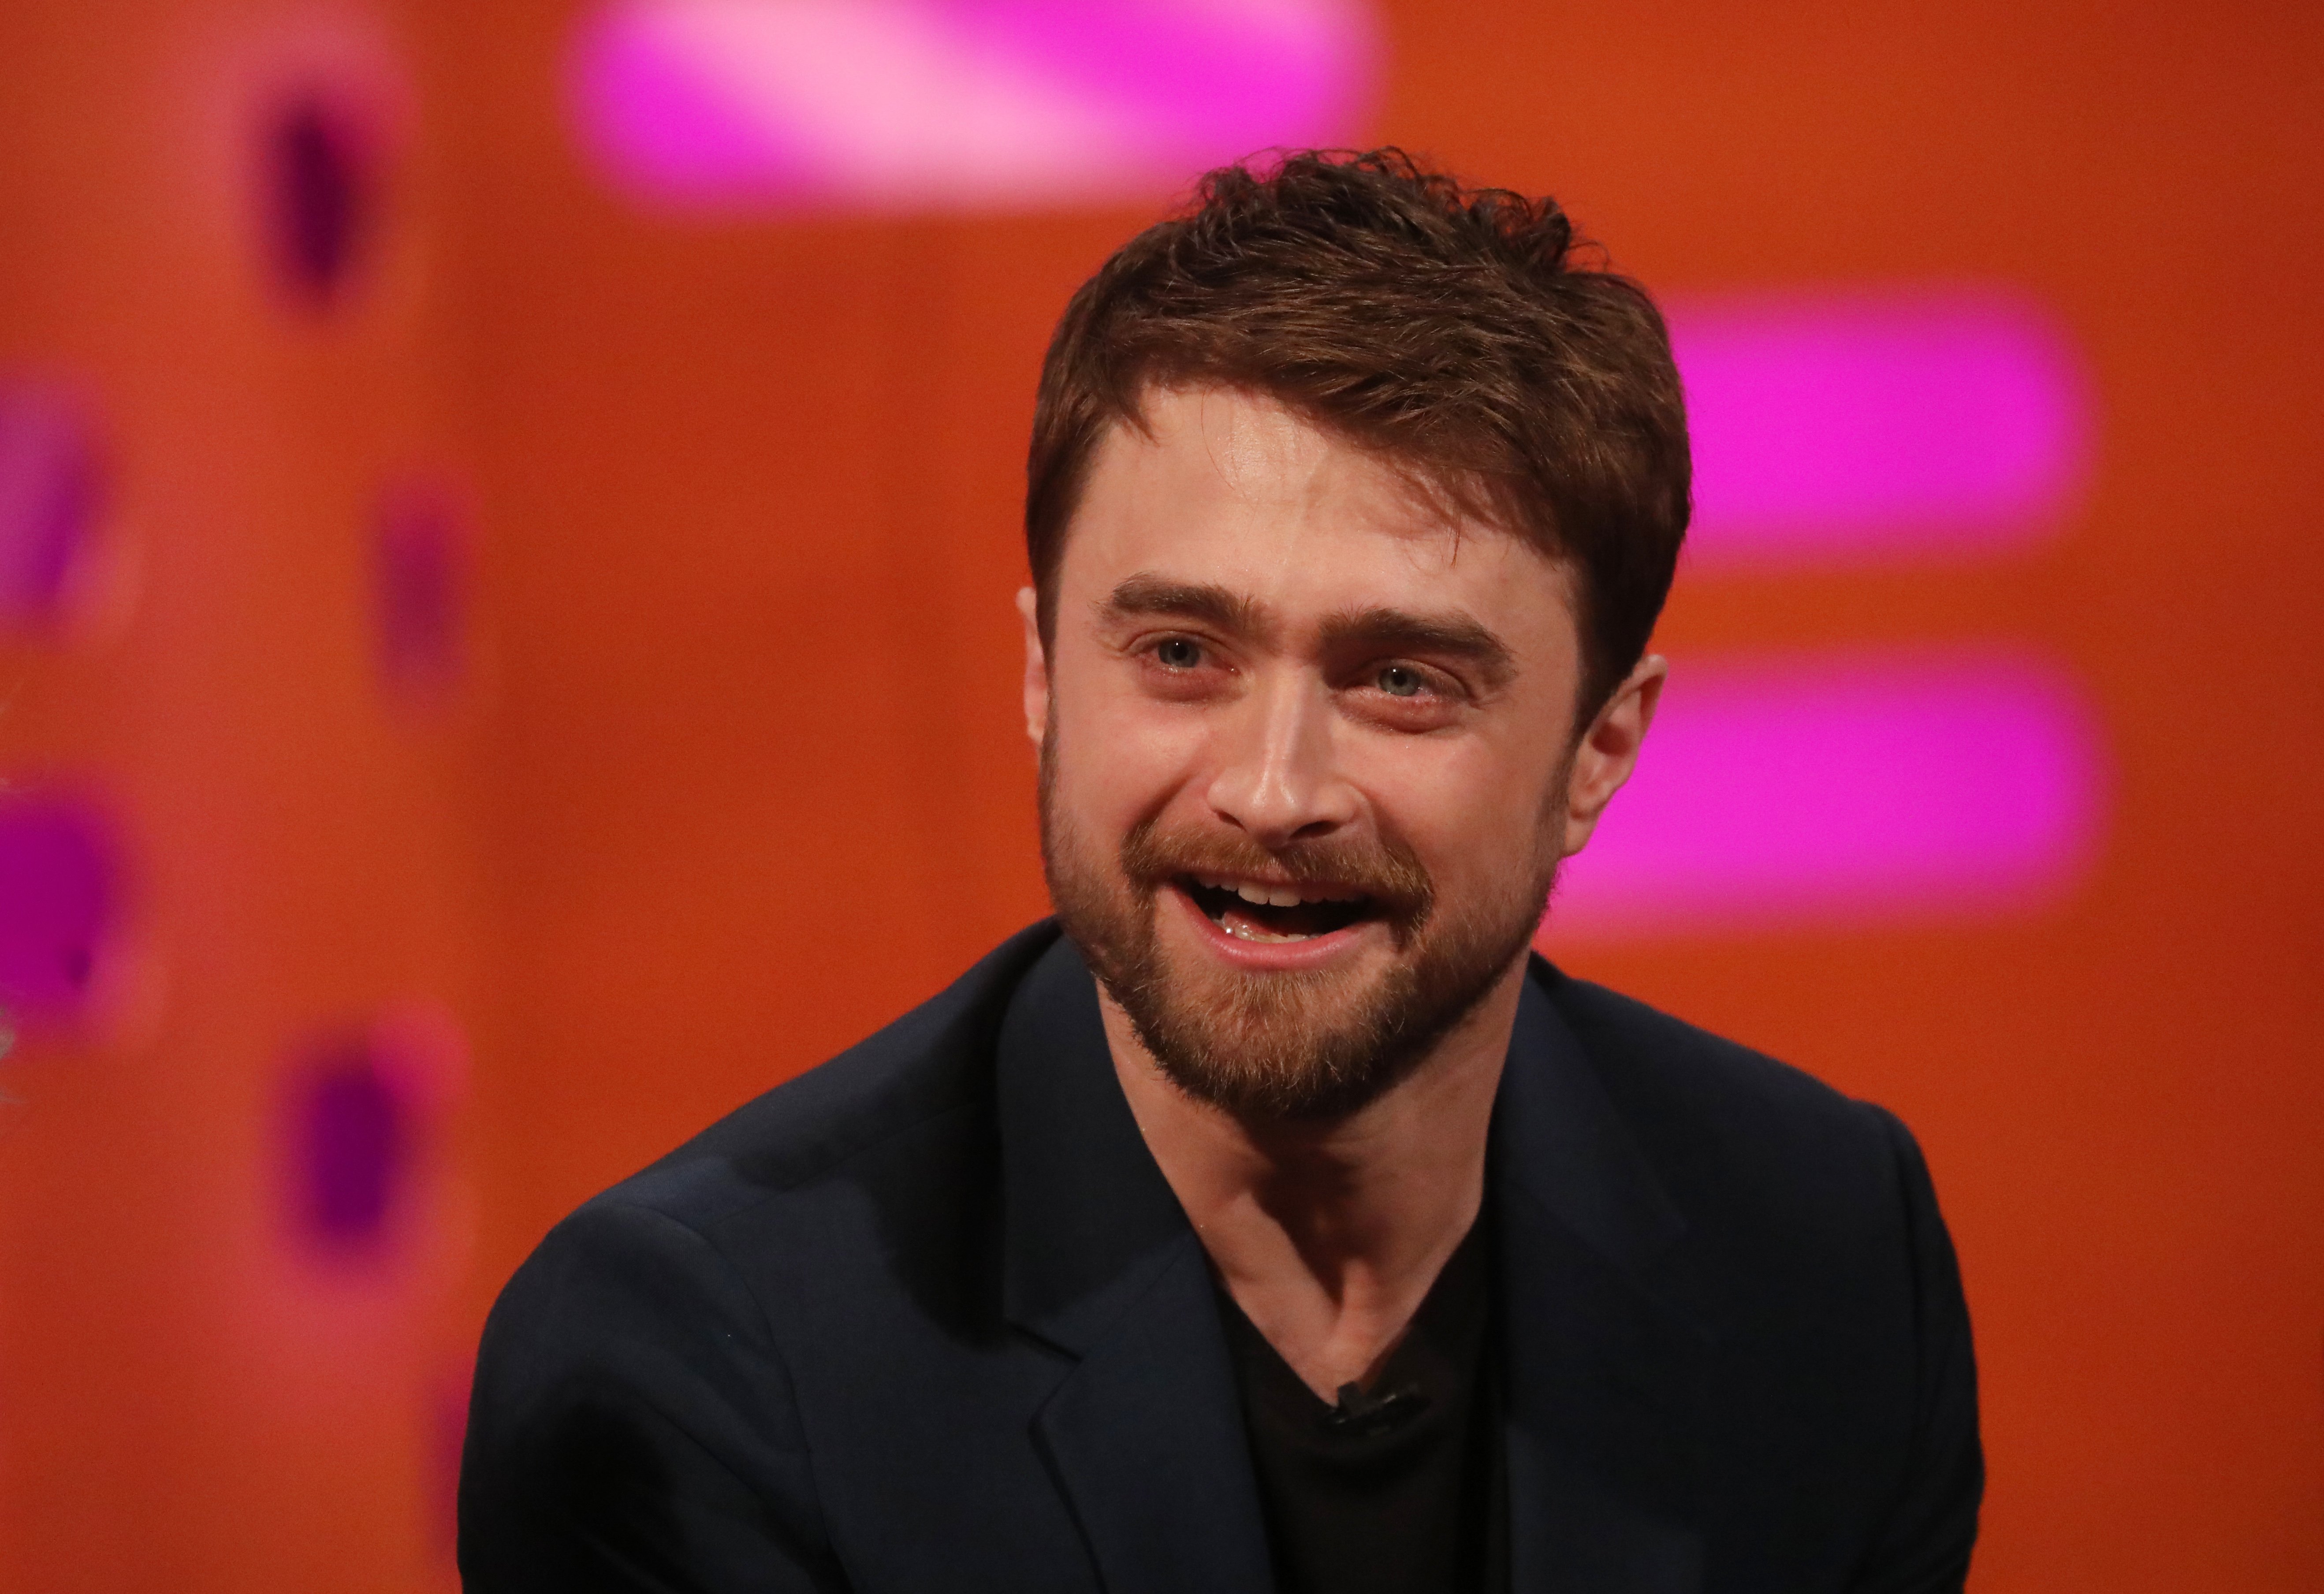 Daniel Radcliffe at the "Graham Norton Show" on January 9, 2020, in Wood Lane, London. | Source: Getty Images